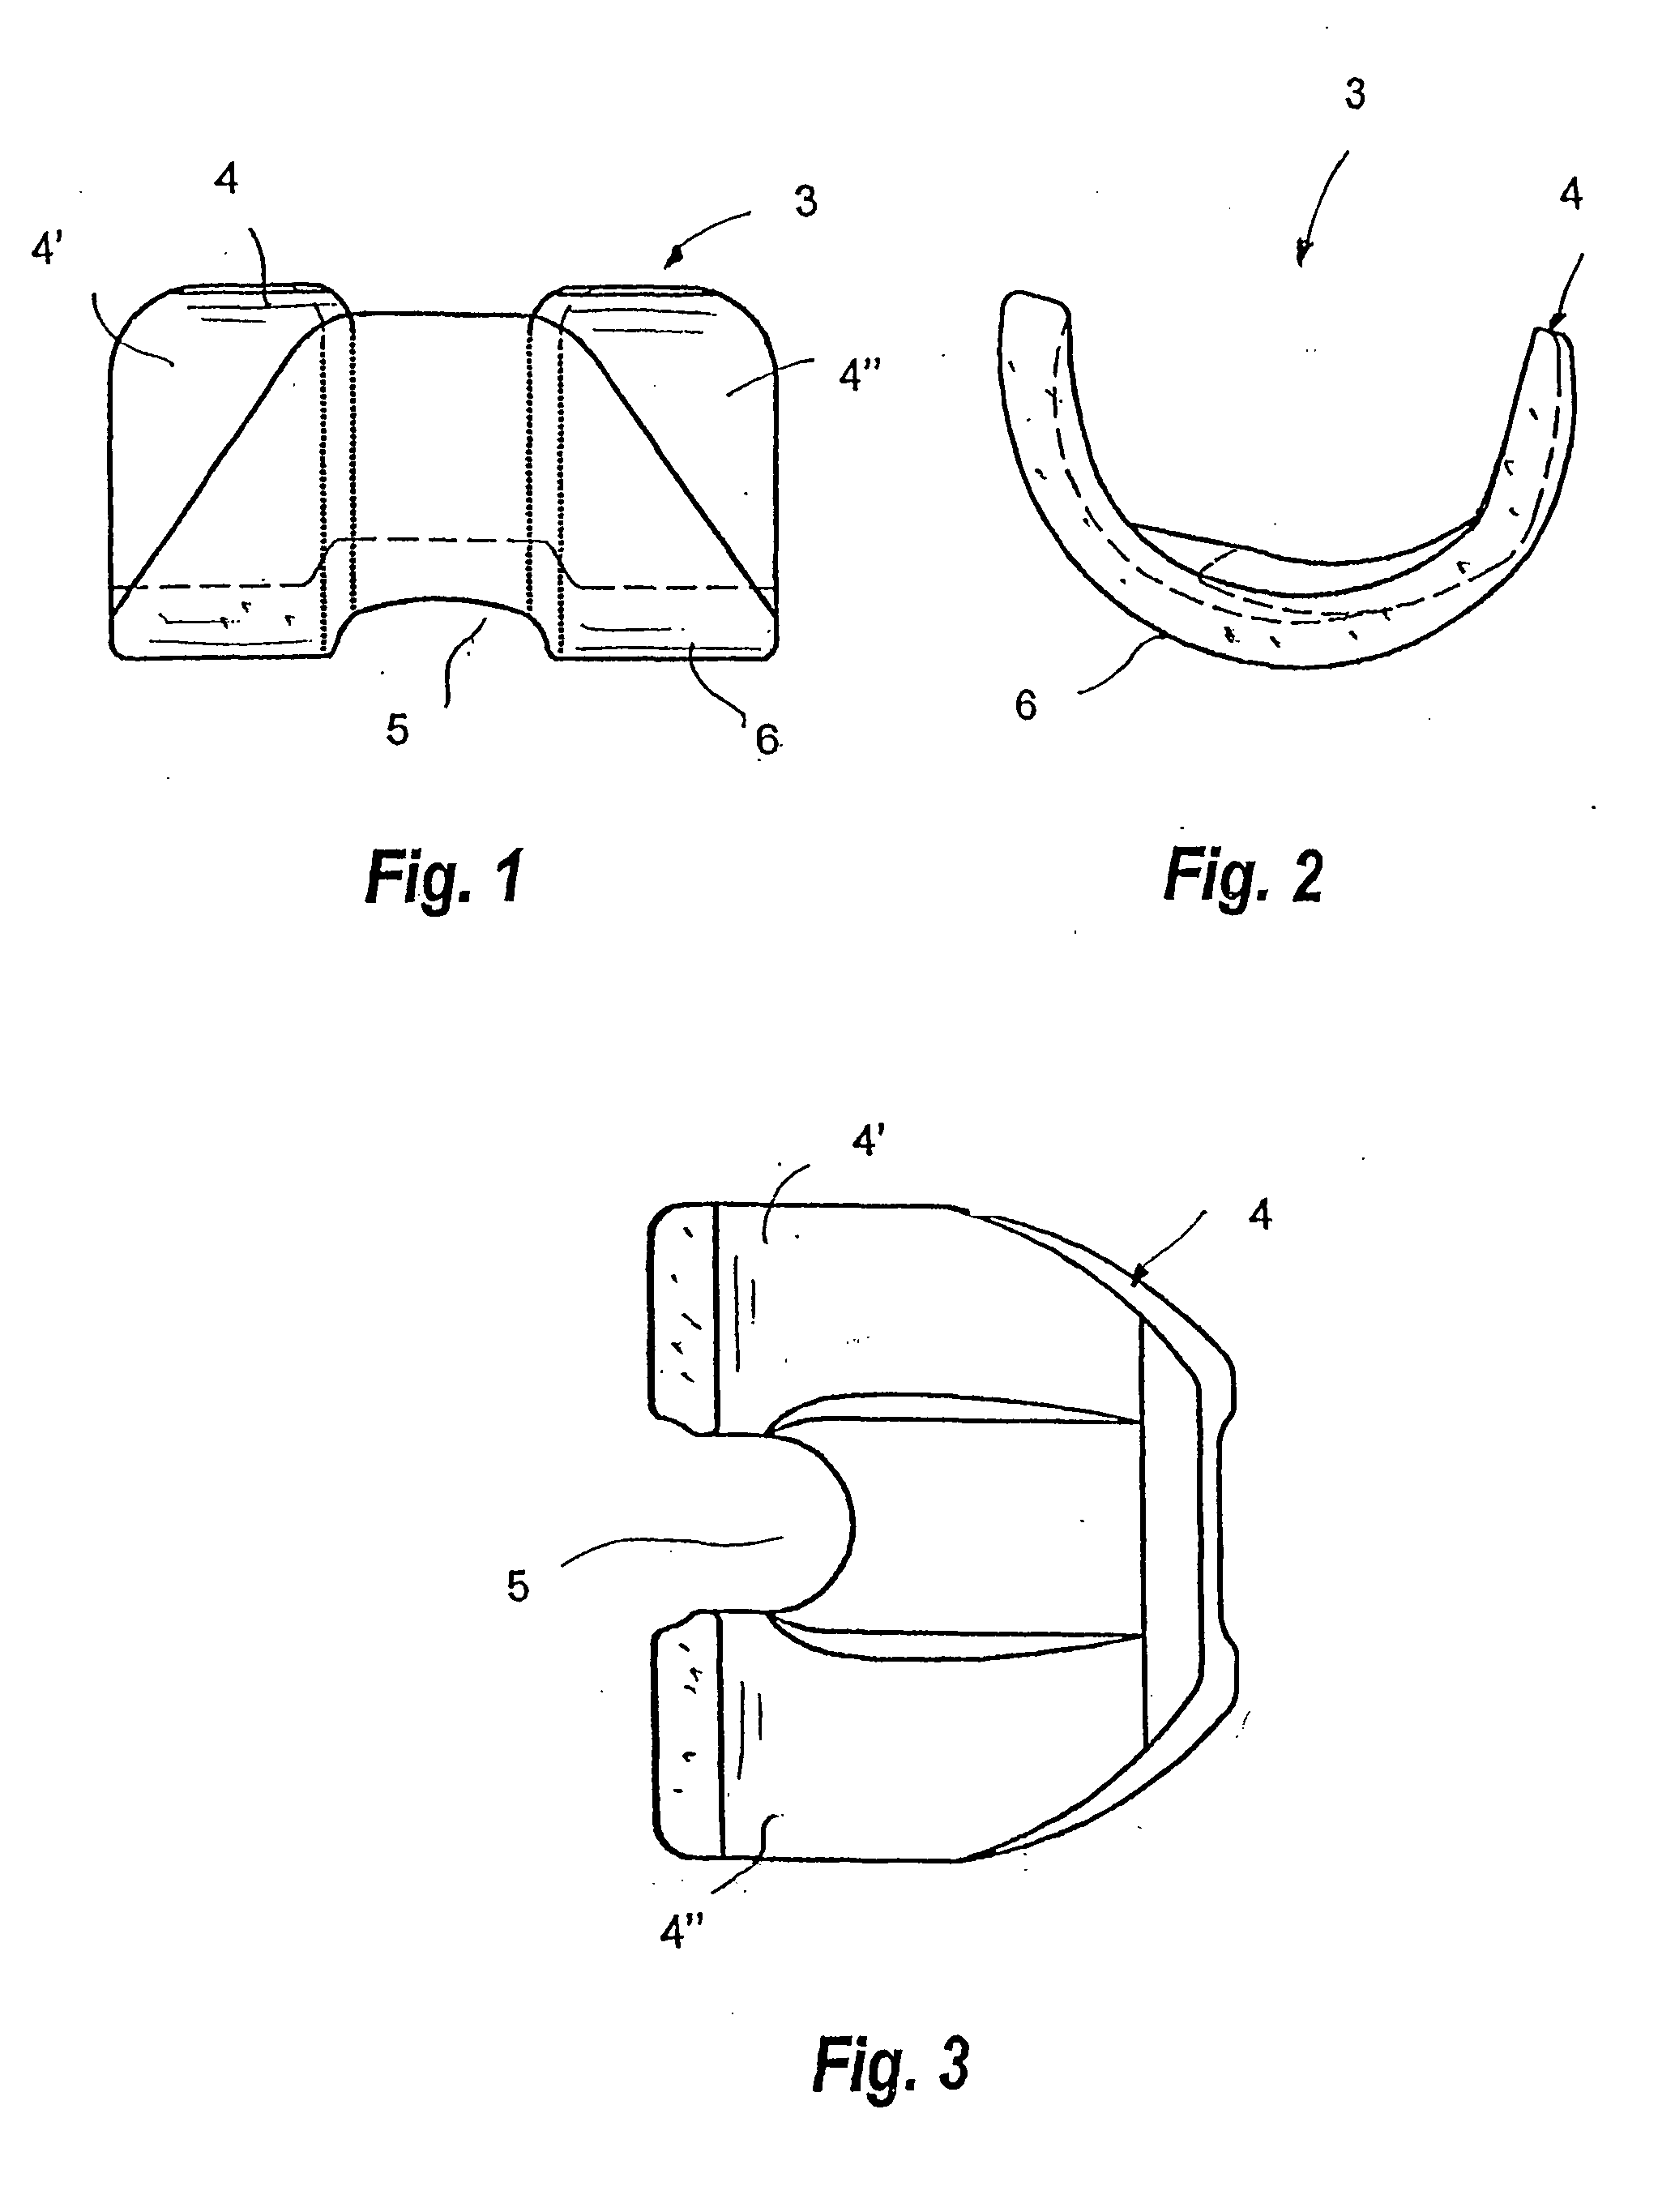 Disposable articulated spacing device for surgical treatment of joints of the human body